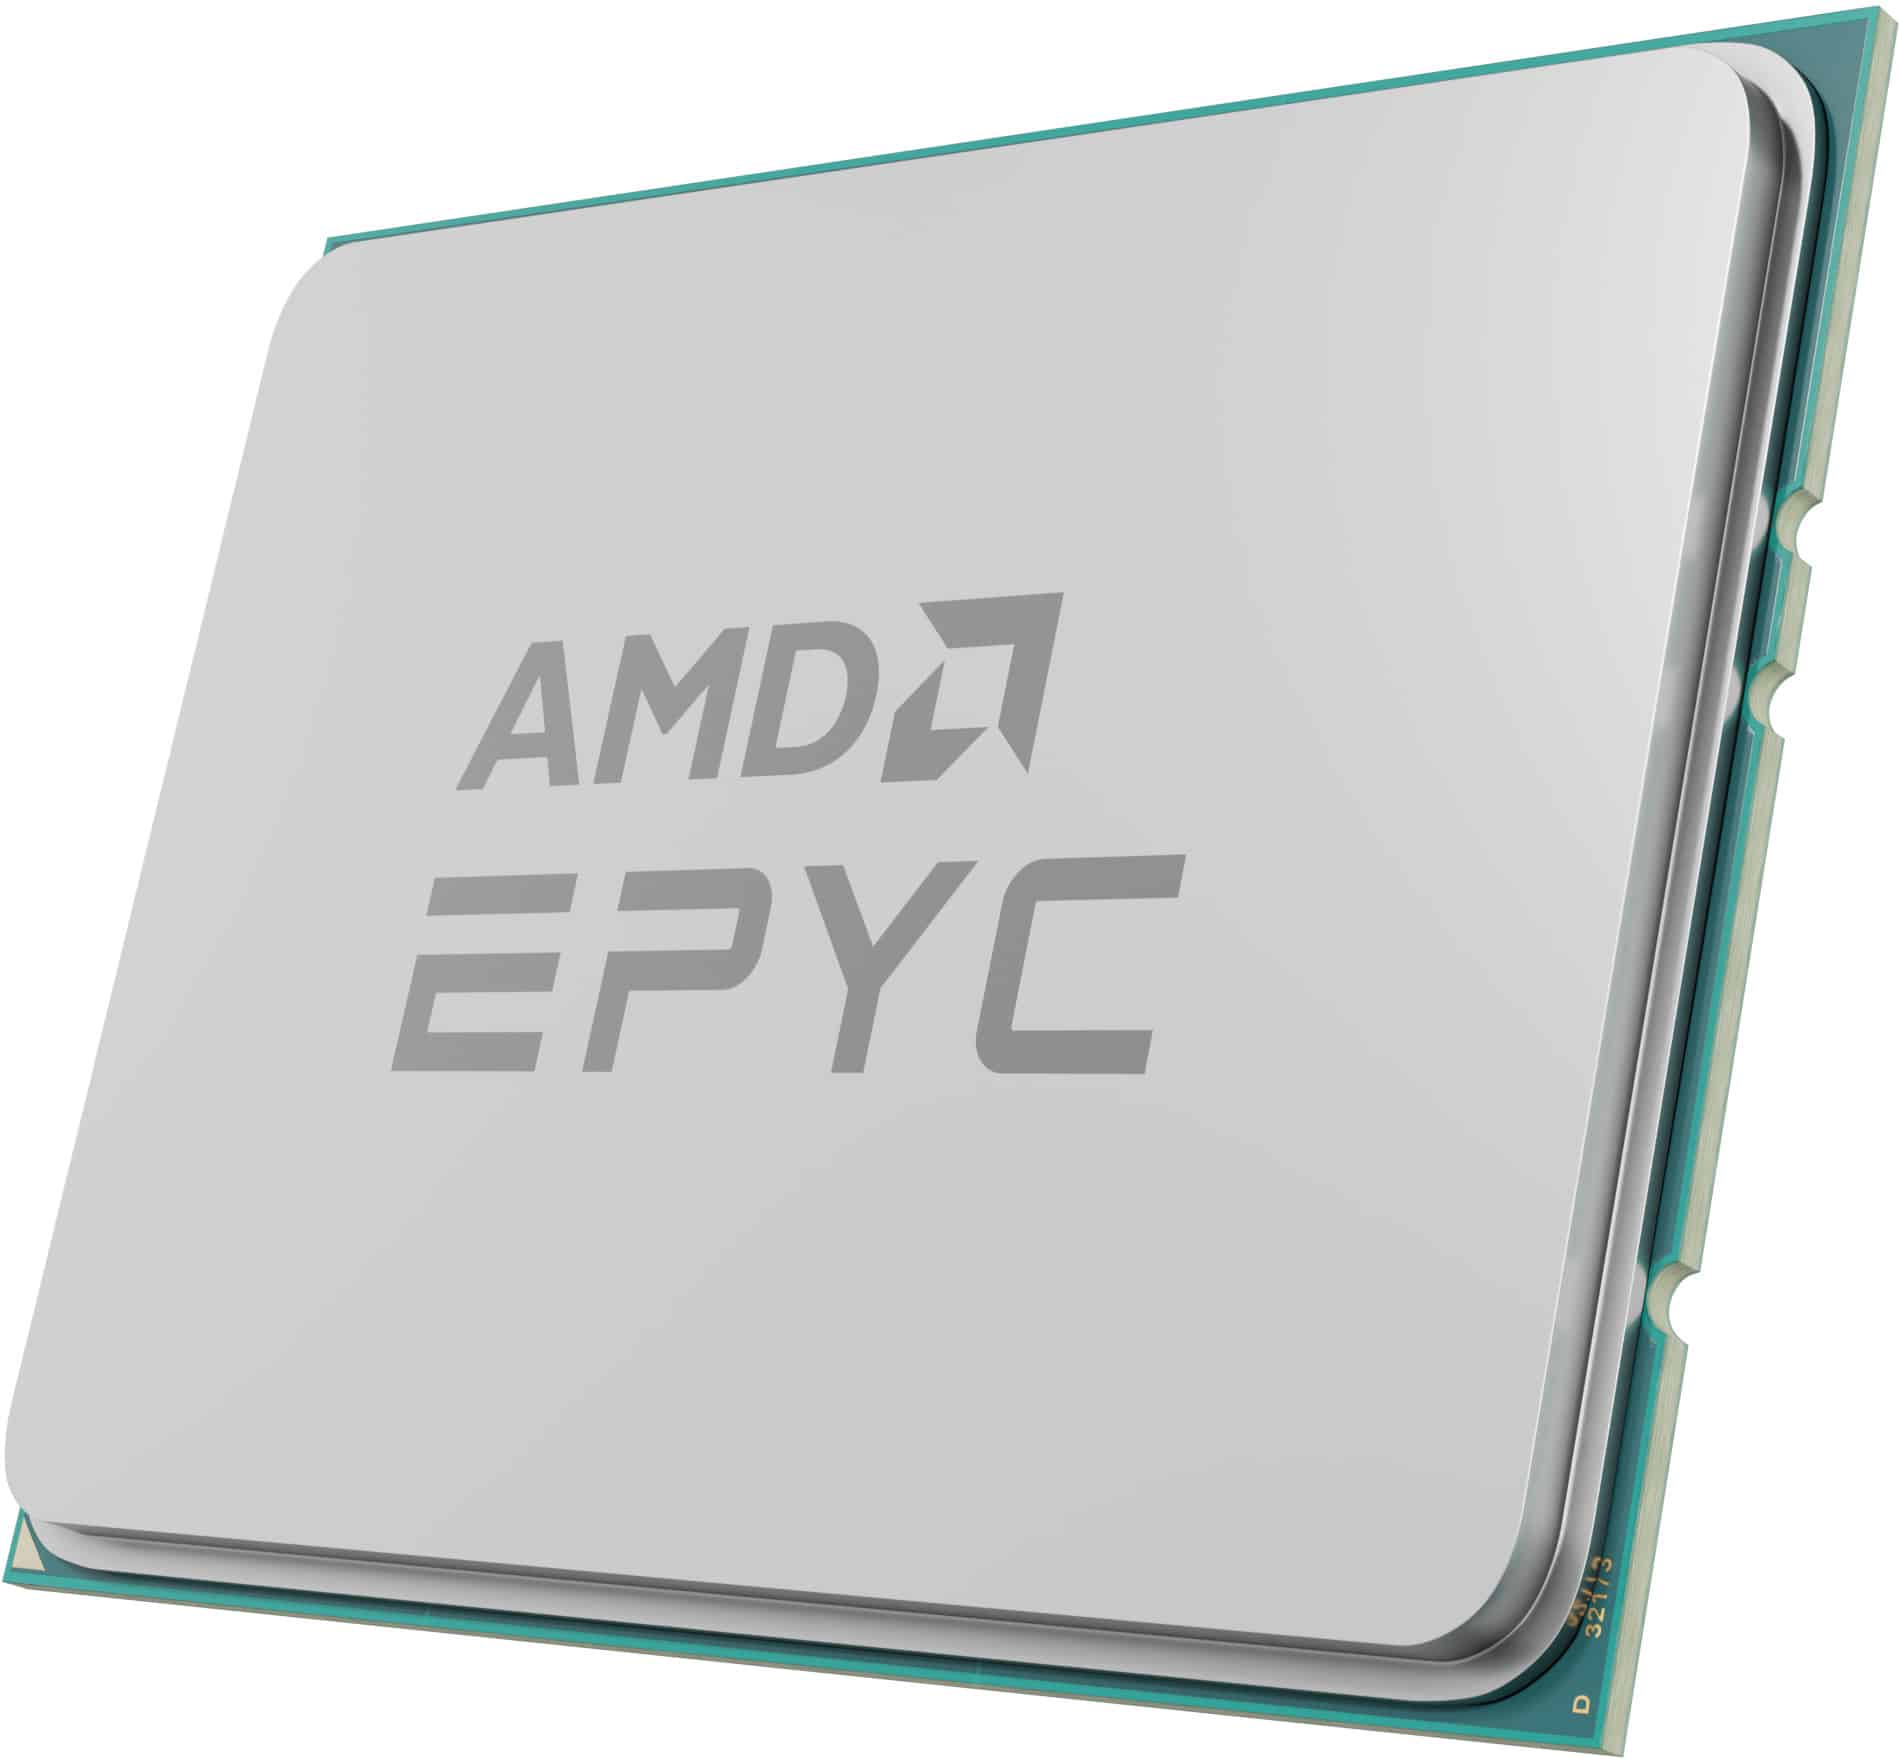 AMD Epyc 9654 sighted: launch together with Zen 4?